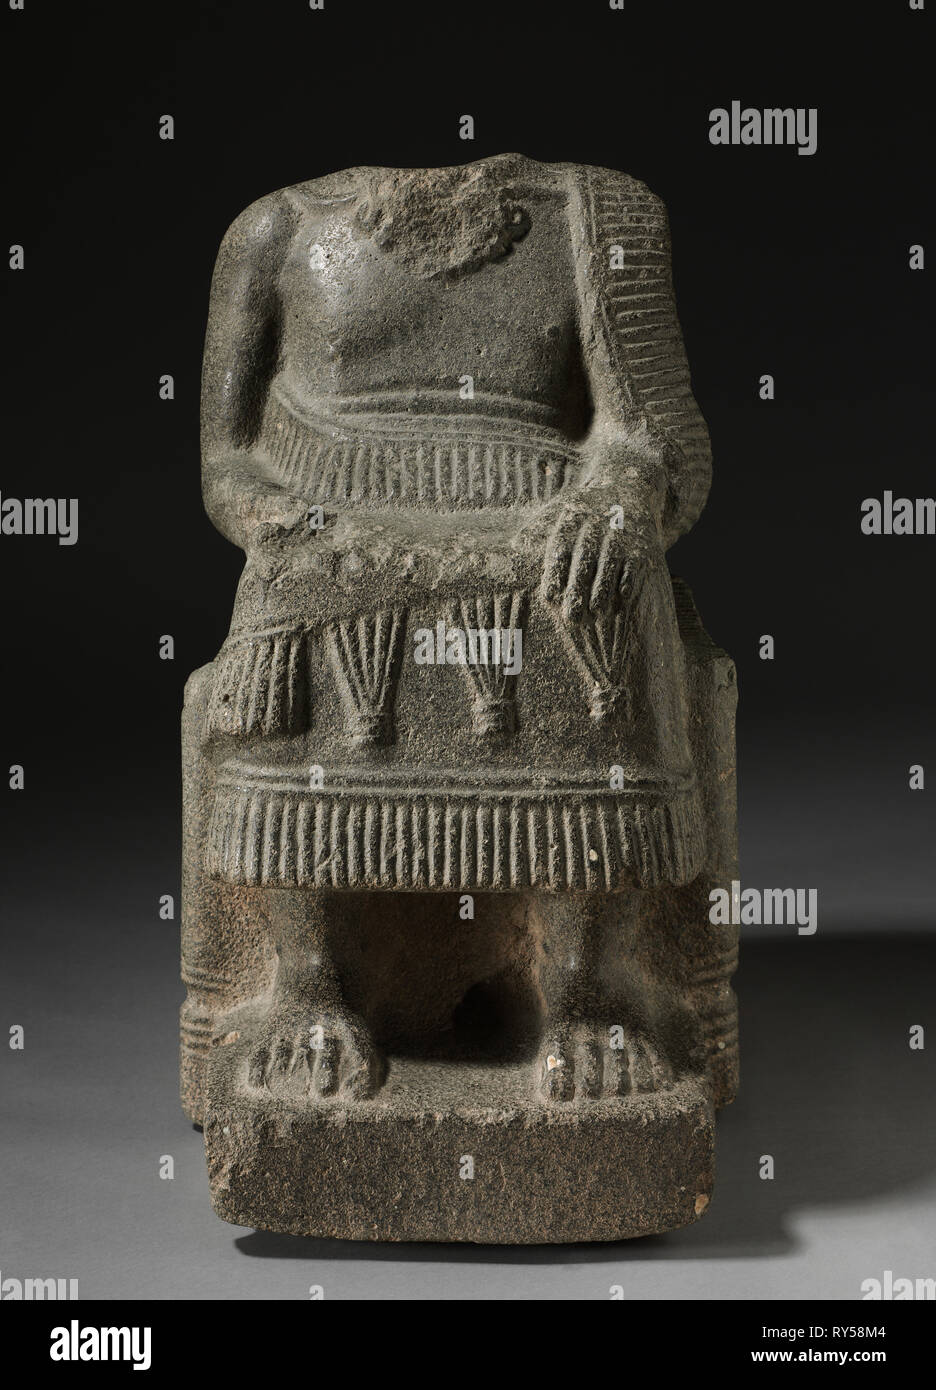 Seated Ruler, 2000-1700 BC. North Syria, possibly the area of Ebla, 2000-1700 BC. Limestone with shell inclusions; overall: 66.7 x 38.2 x 54.6 cm (26 1/4 x 15 1/16 x 21 1/2 in Stock Photo